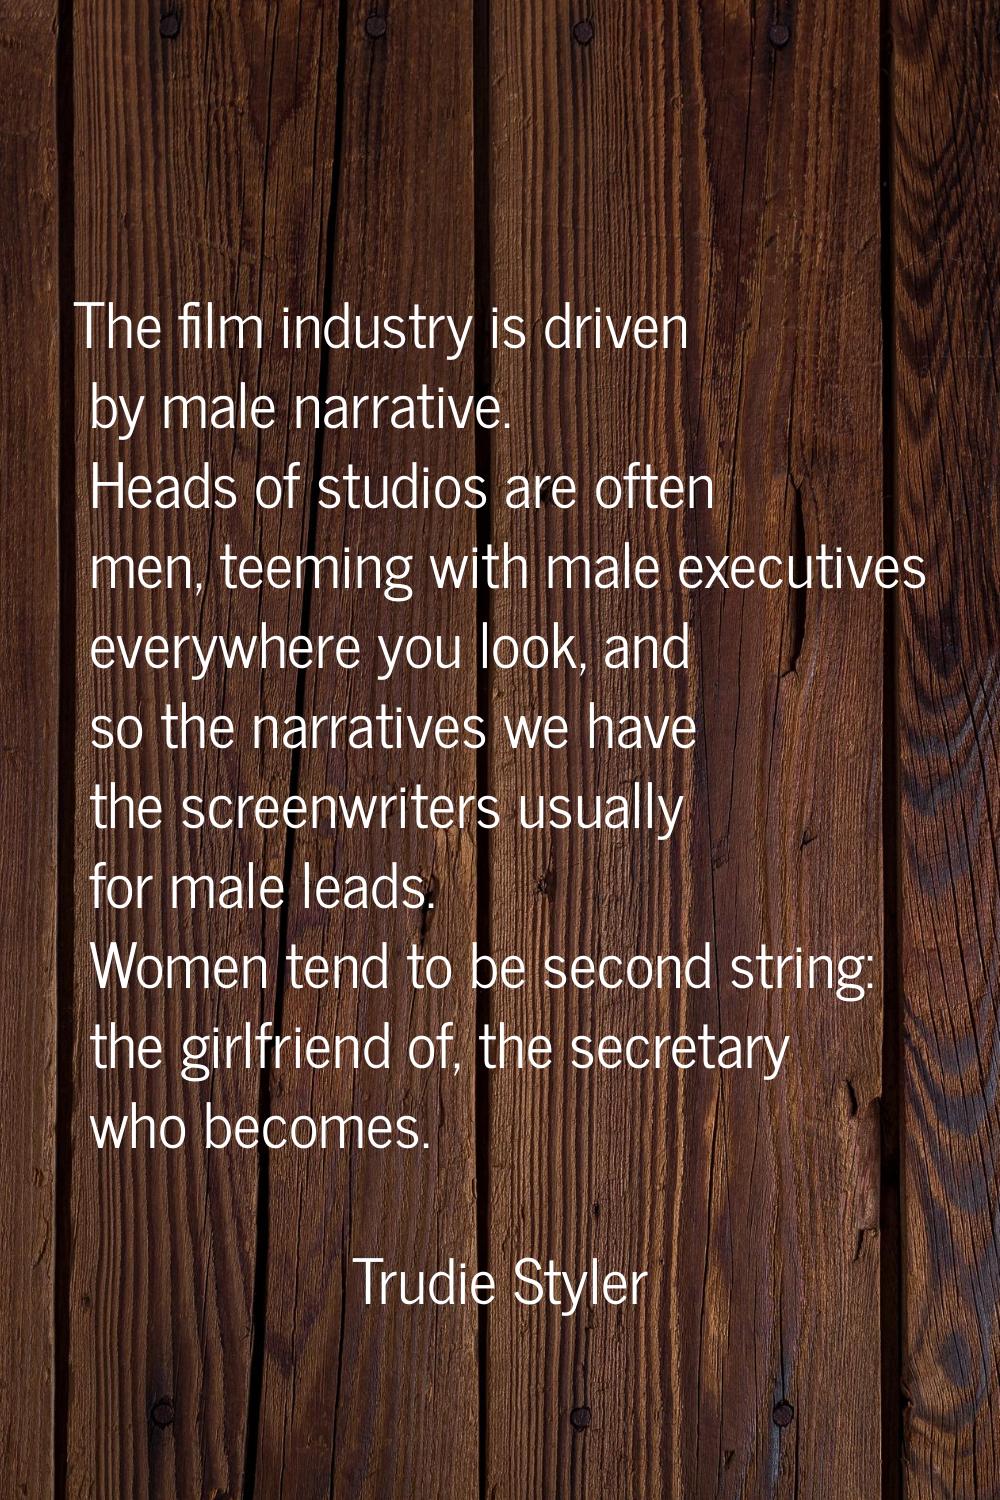 The film industry is driven by male narrative. Heads of studios are often men, teeming with male ex